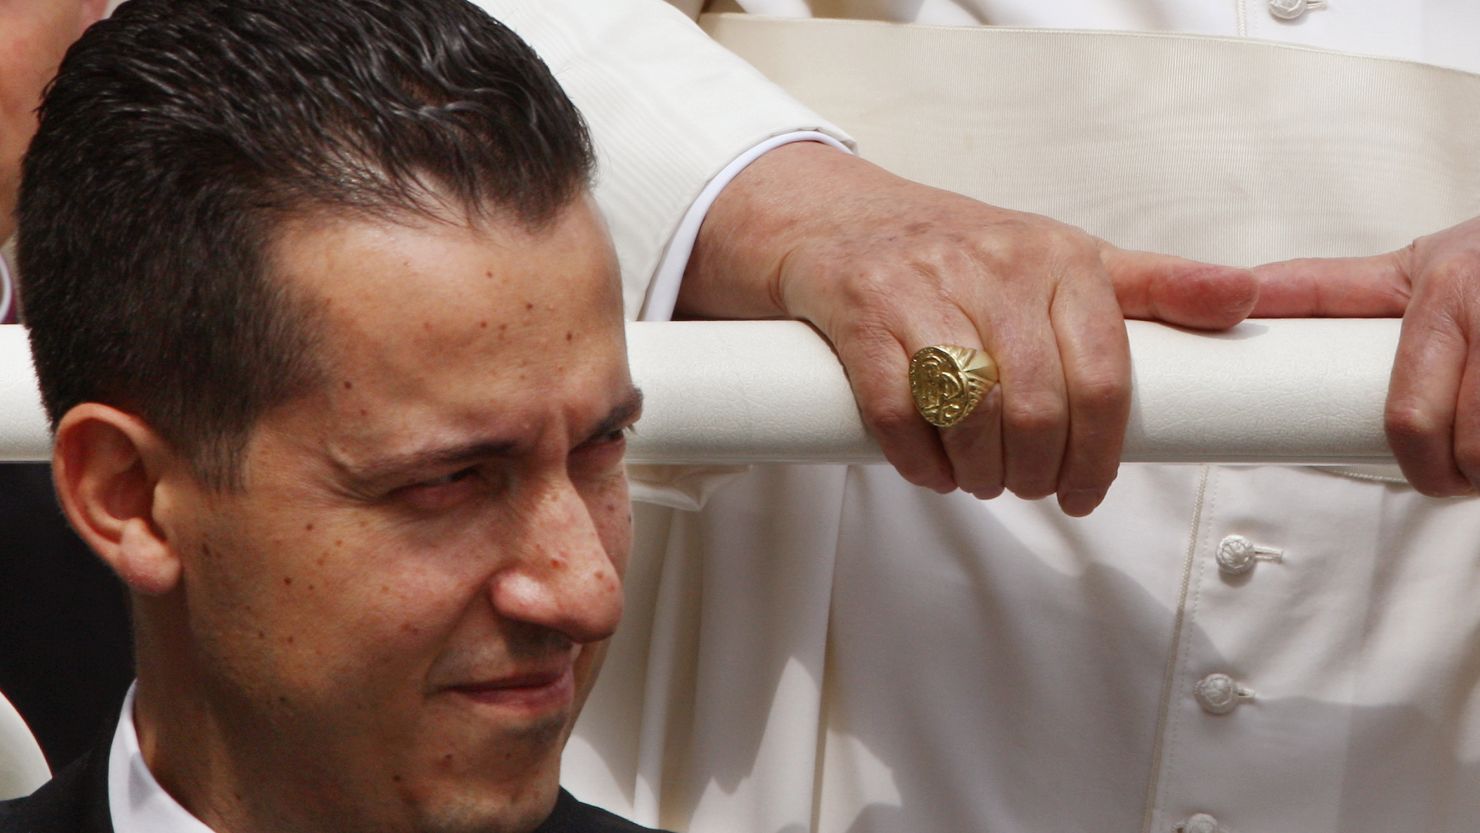 Pope Benedict XVI's former butler Paolo Gabriele pictured sitting below the pontiff on June 6, 2007.